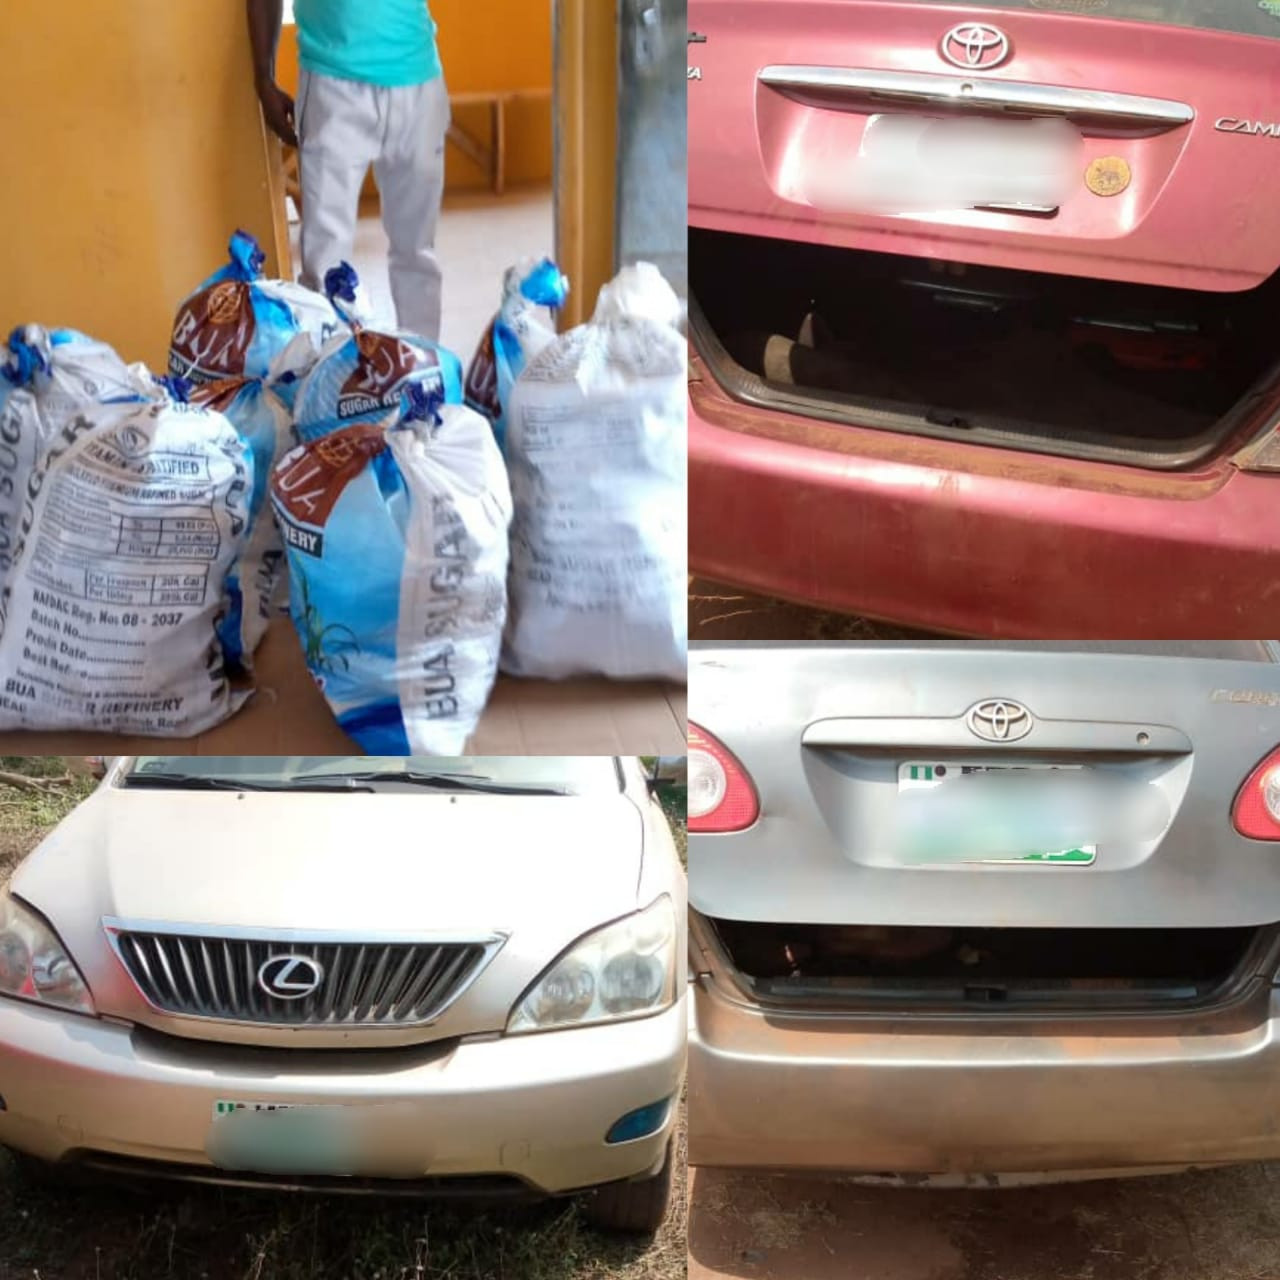 N35m recovered